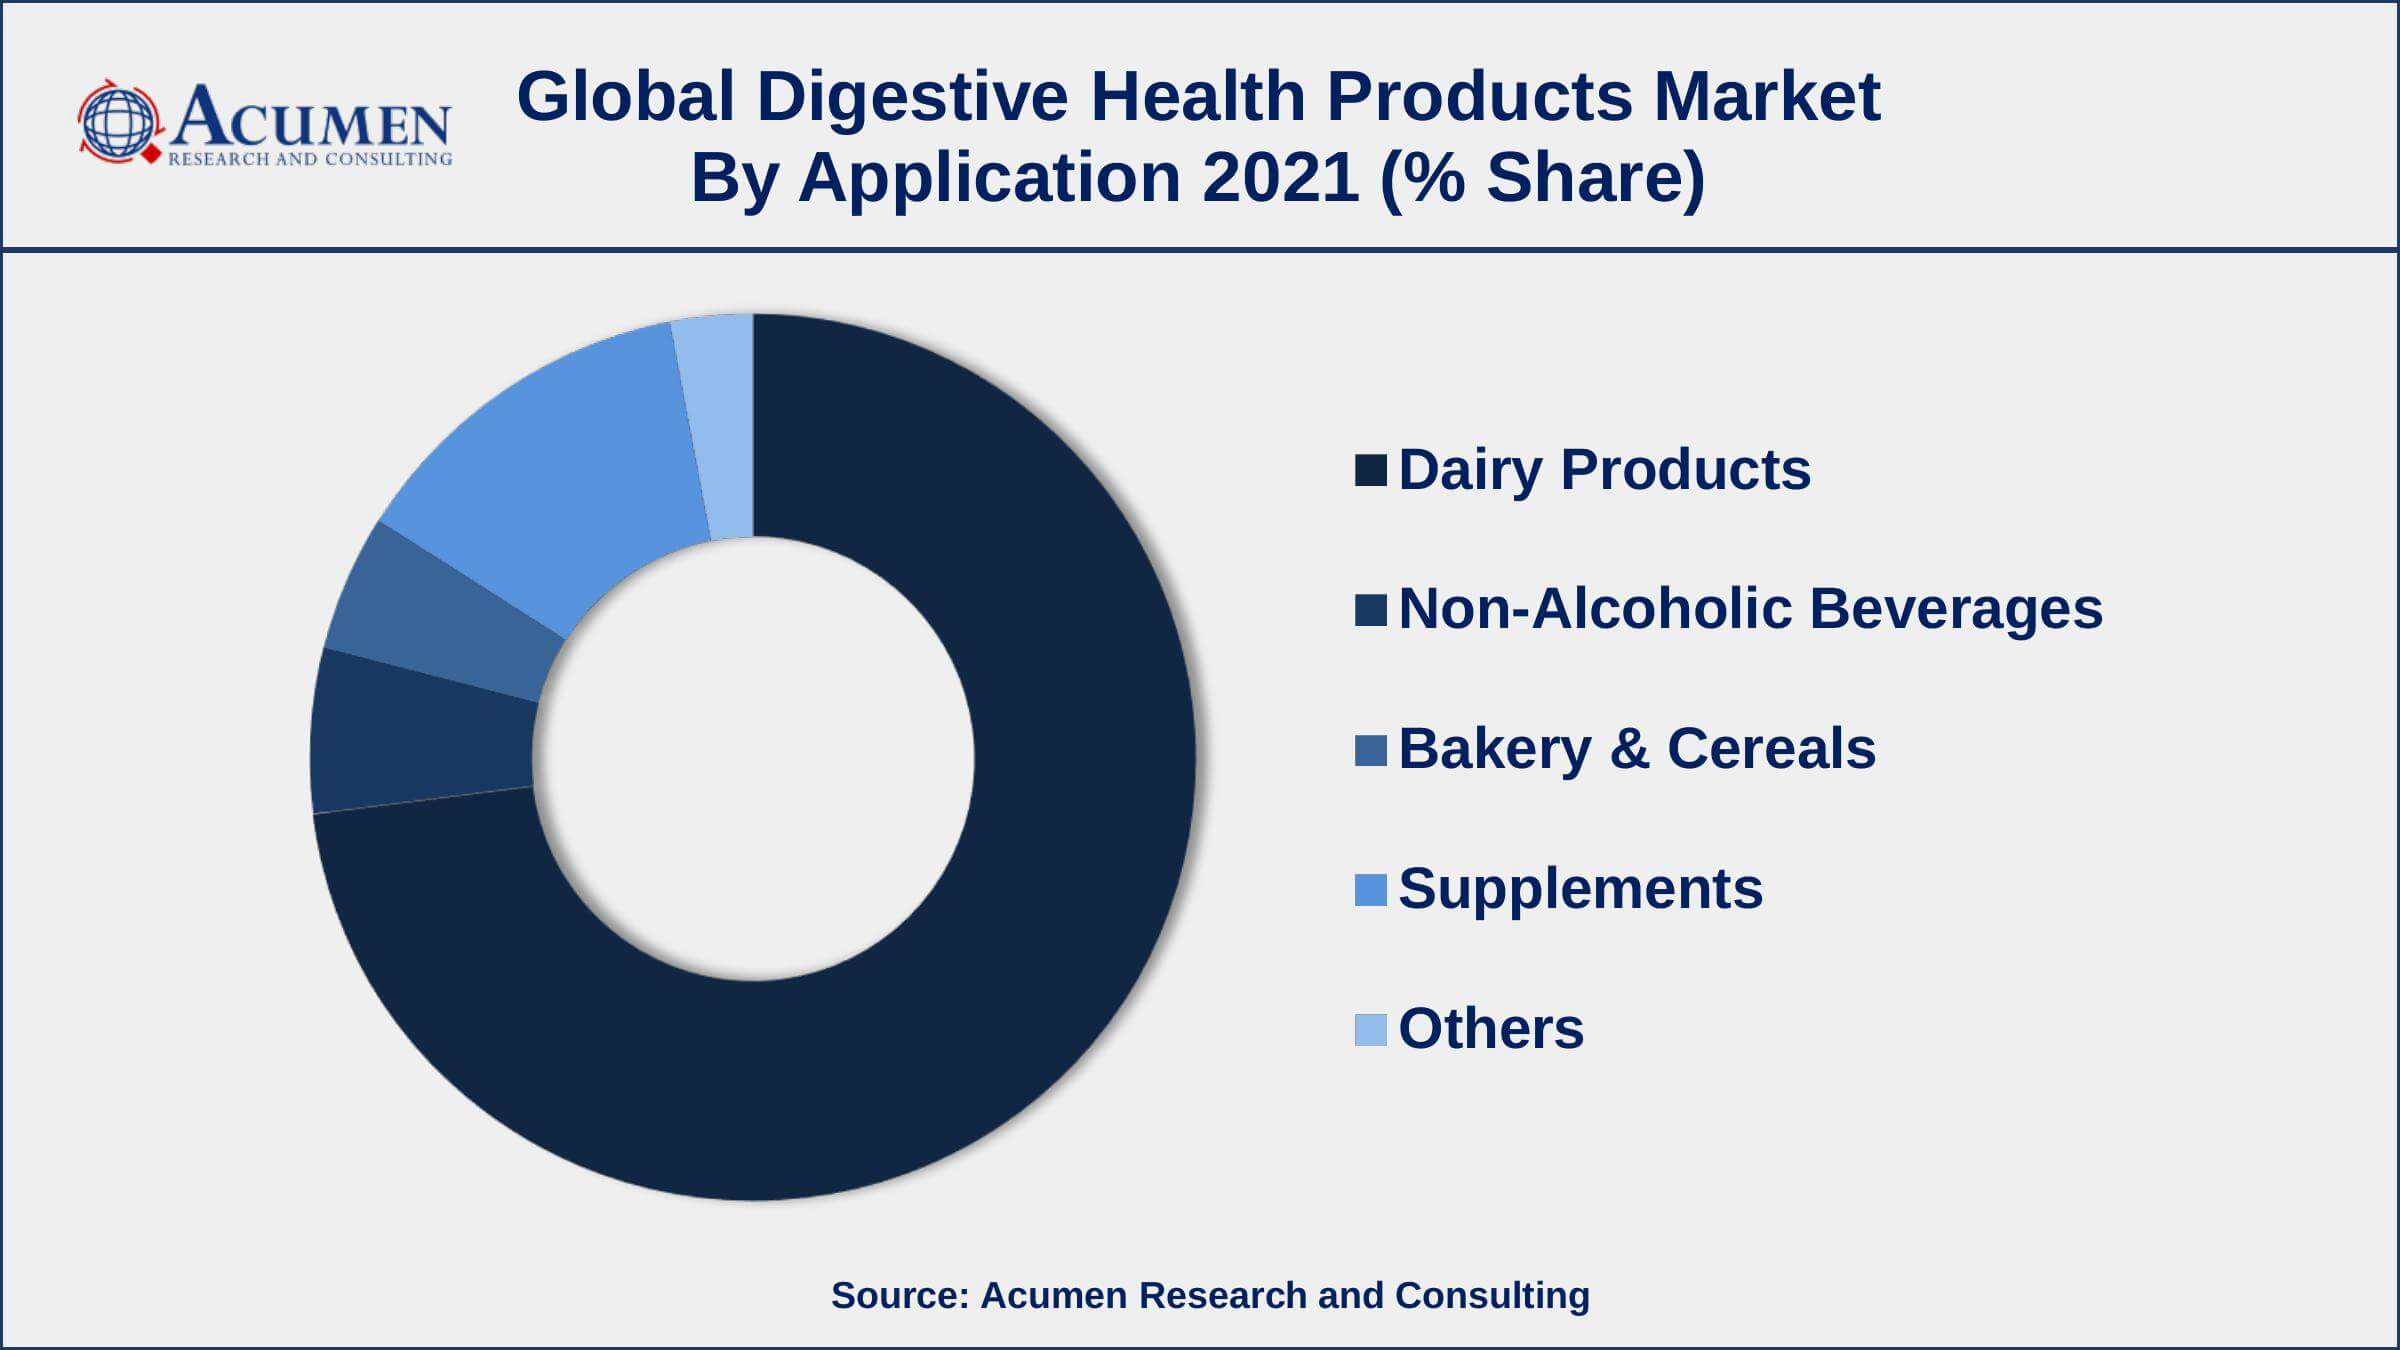 Among application, dairy products segment engaged more than 73% of the total market share